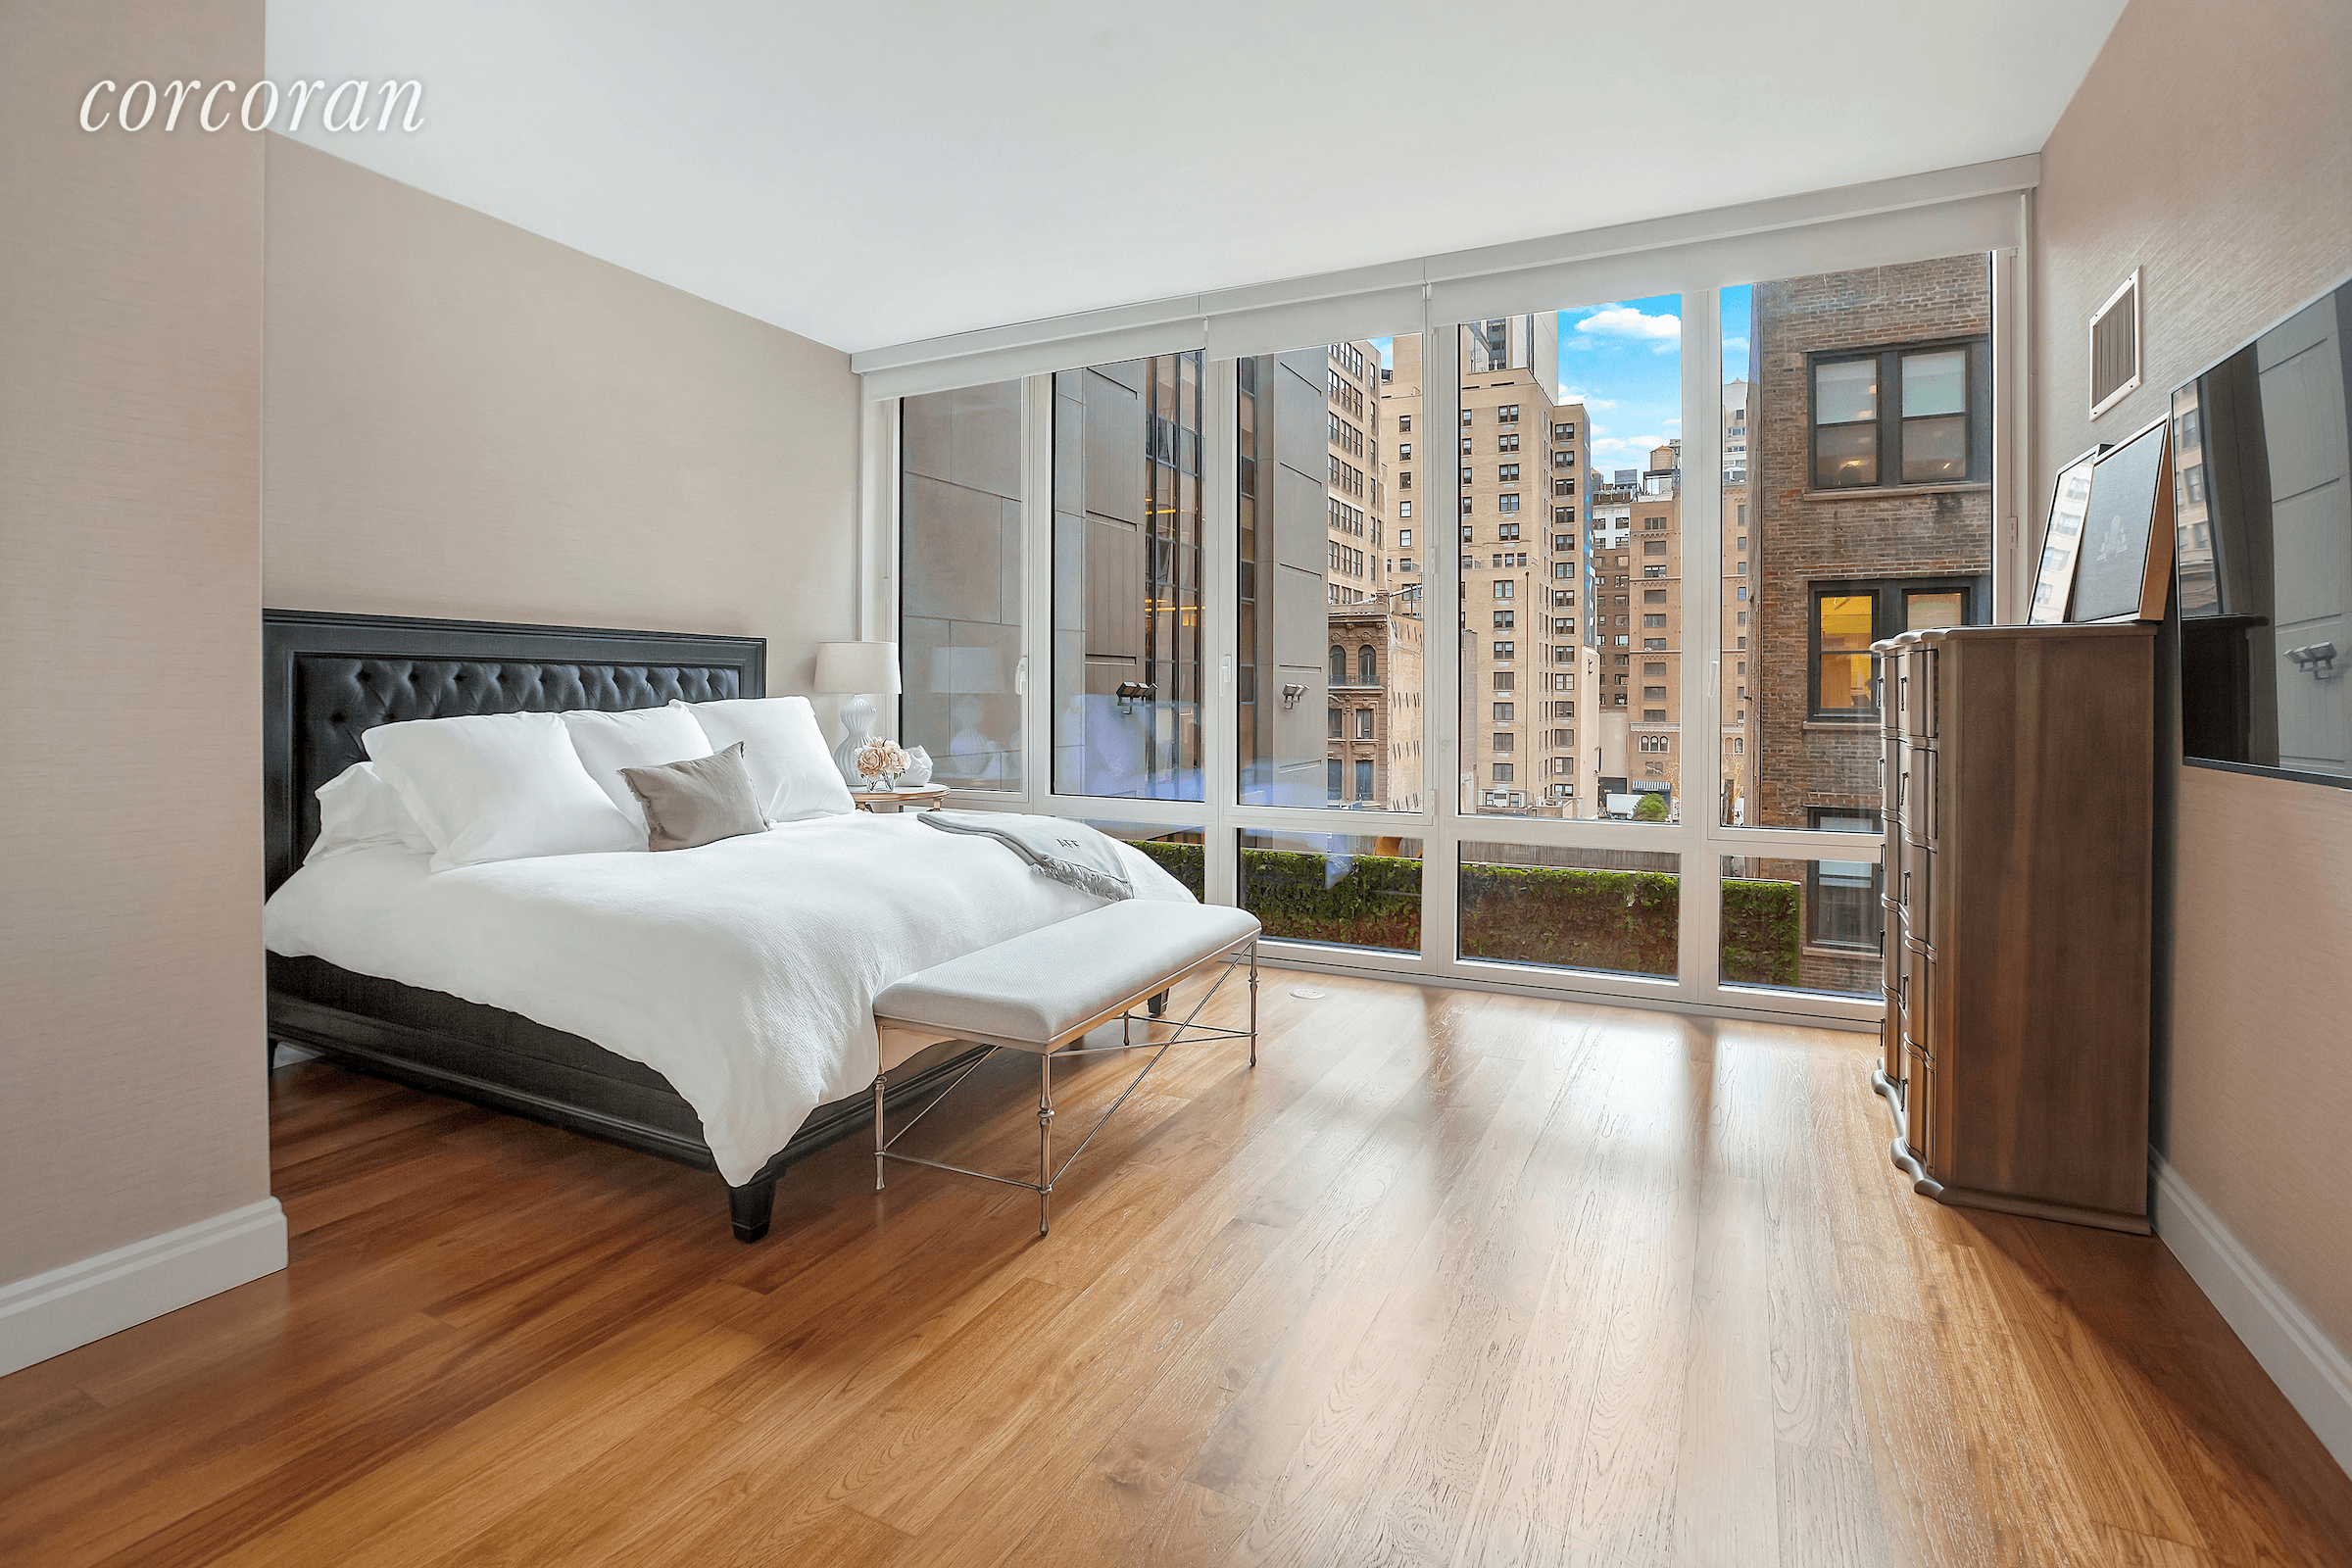 Work from home in style in the heart of Manhattan !